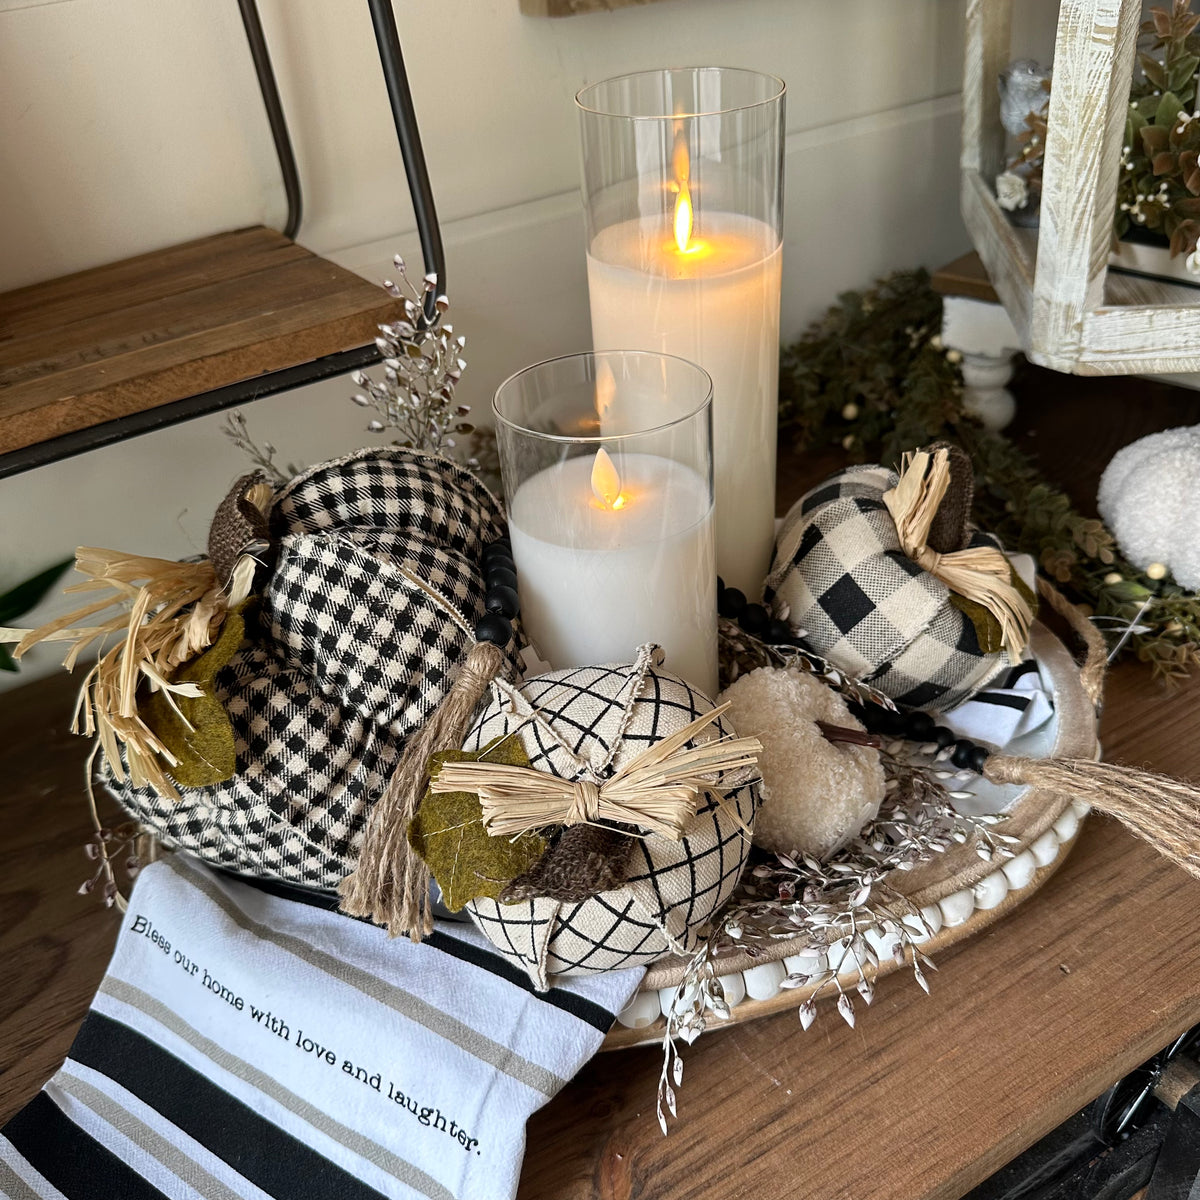 Bless Our Home | Autumn Tabletop Display